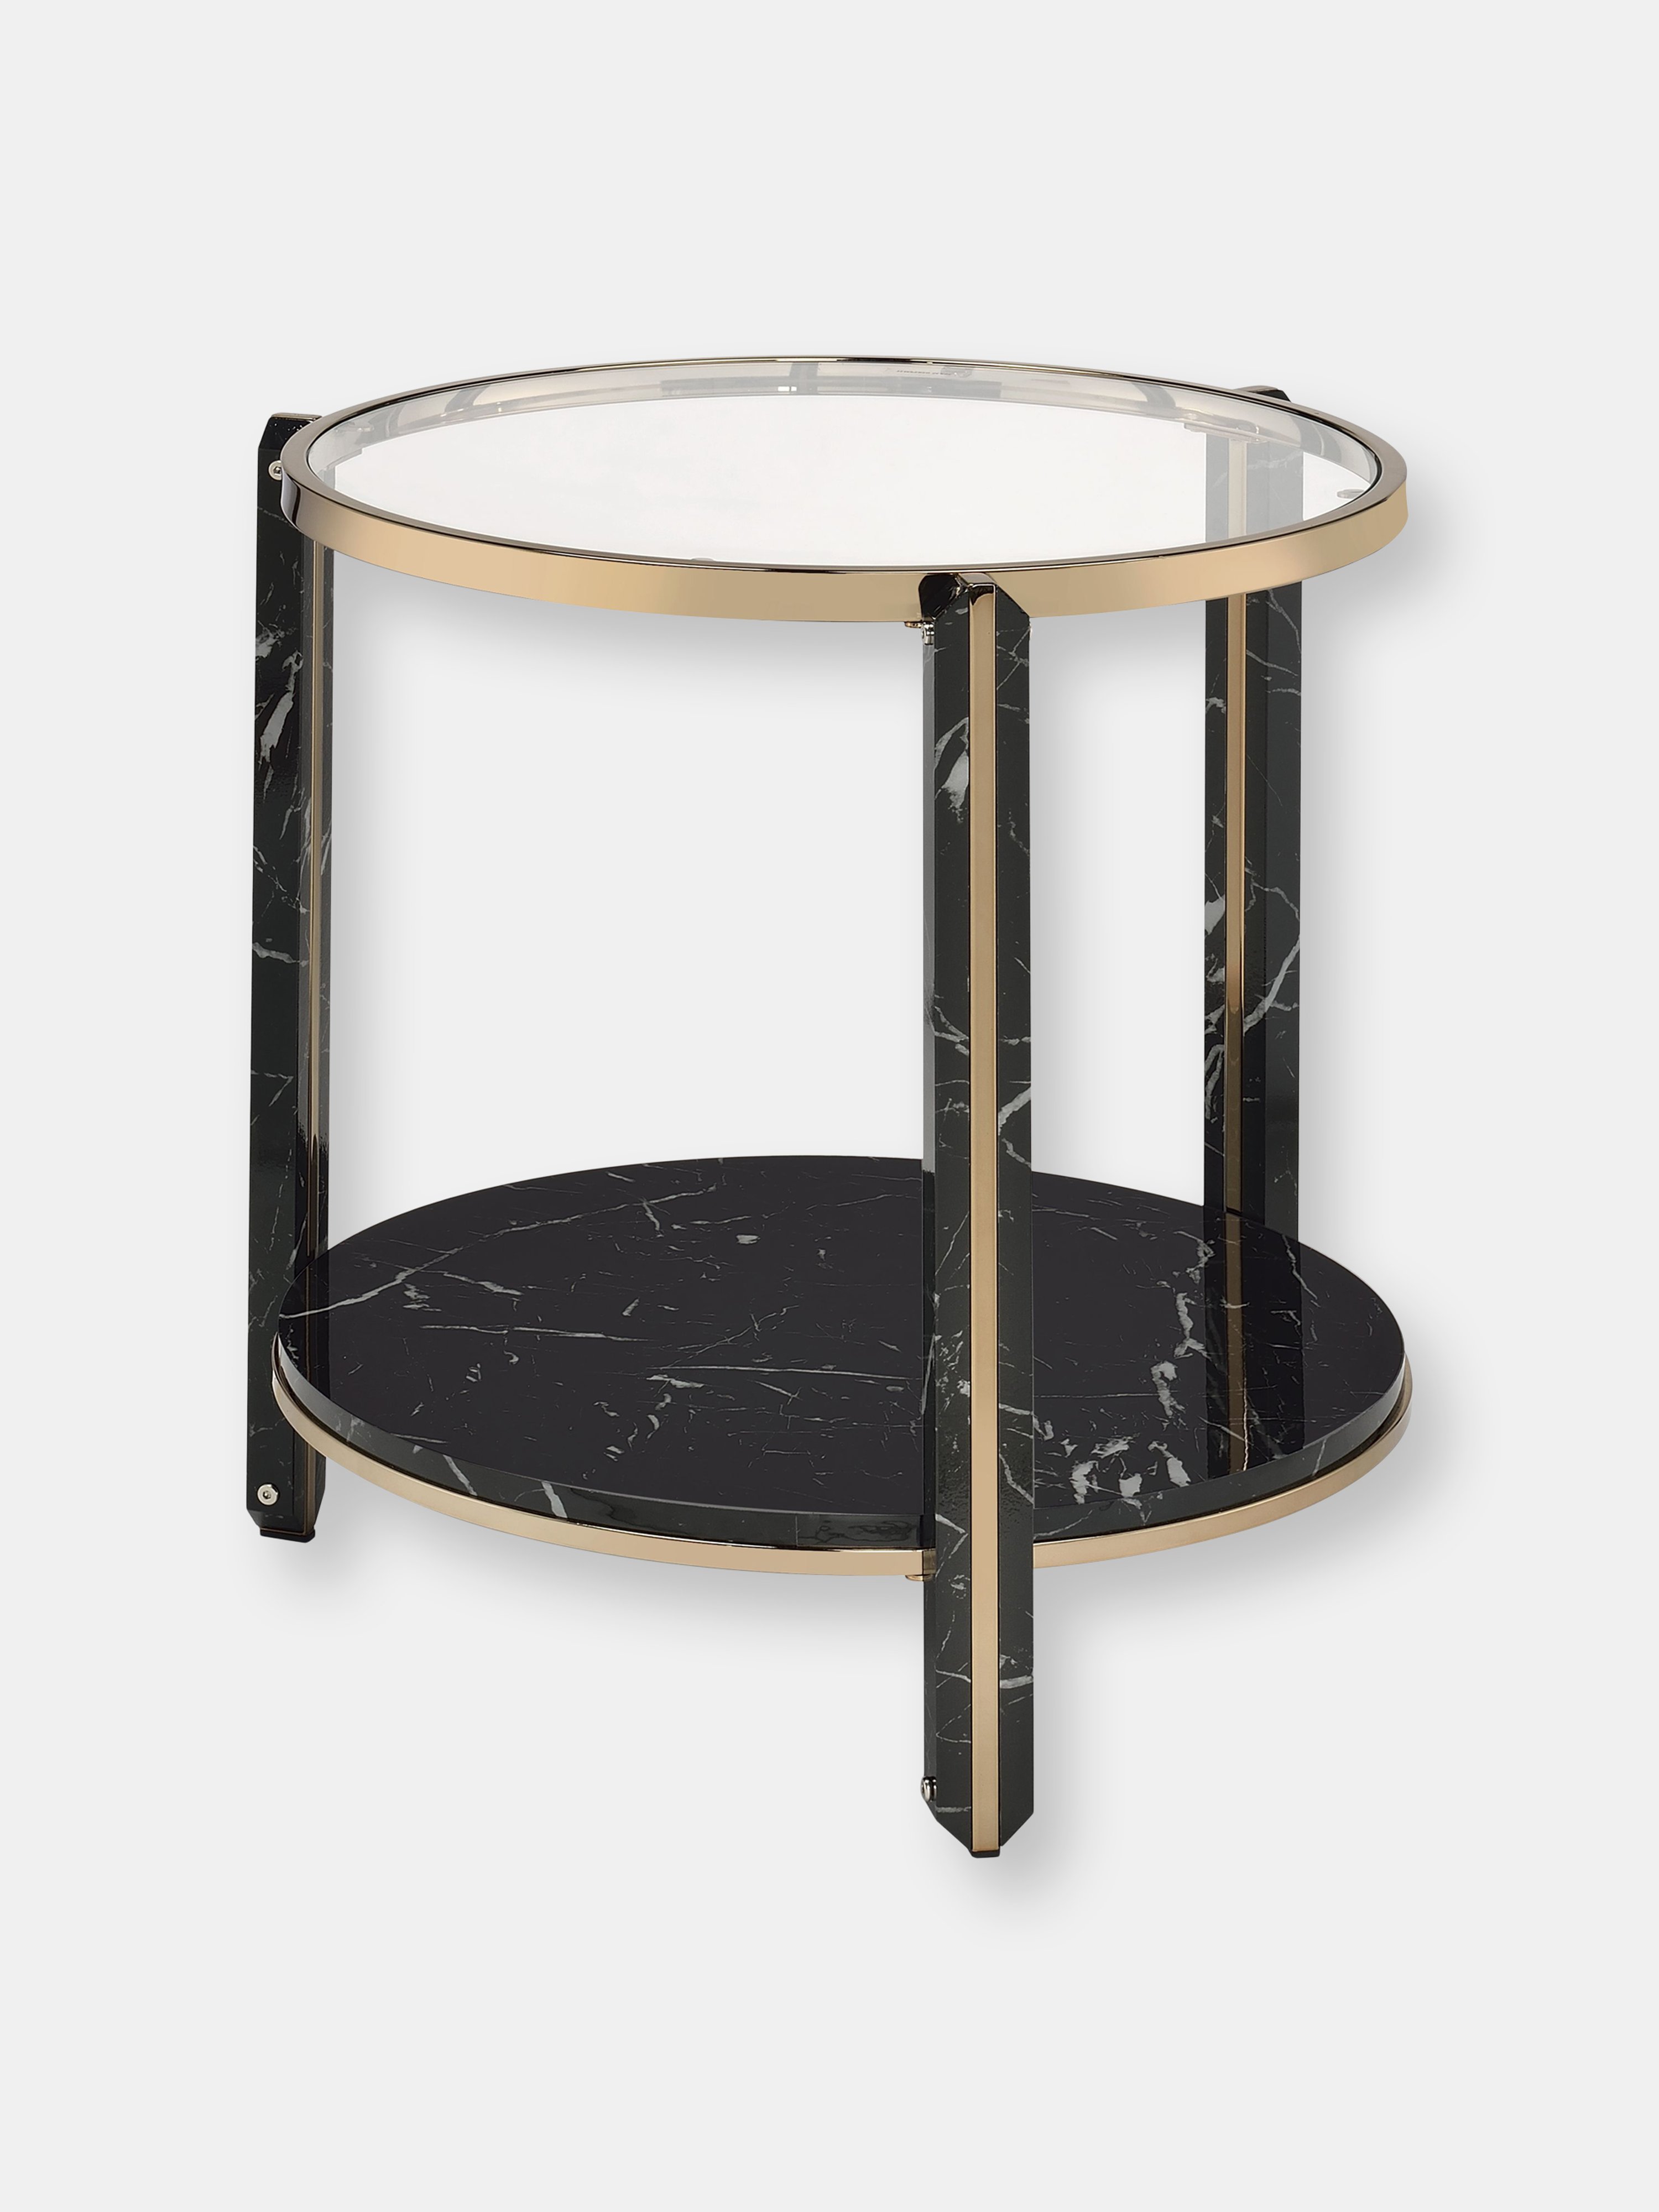 ACME FURNITURE ACME FURNITURE ACME THISTLE END TABLE, CLEAR GLASS, FAUX BLACK MARBLE & CHAMPAGNE FINISH